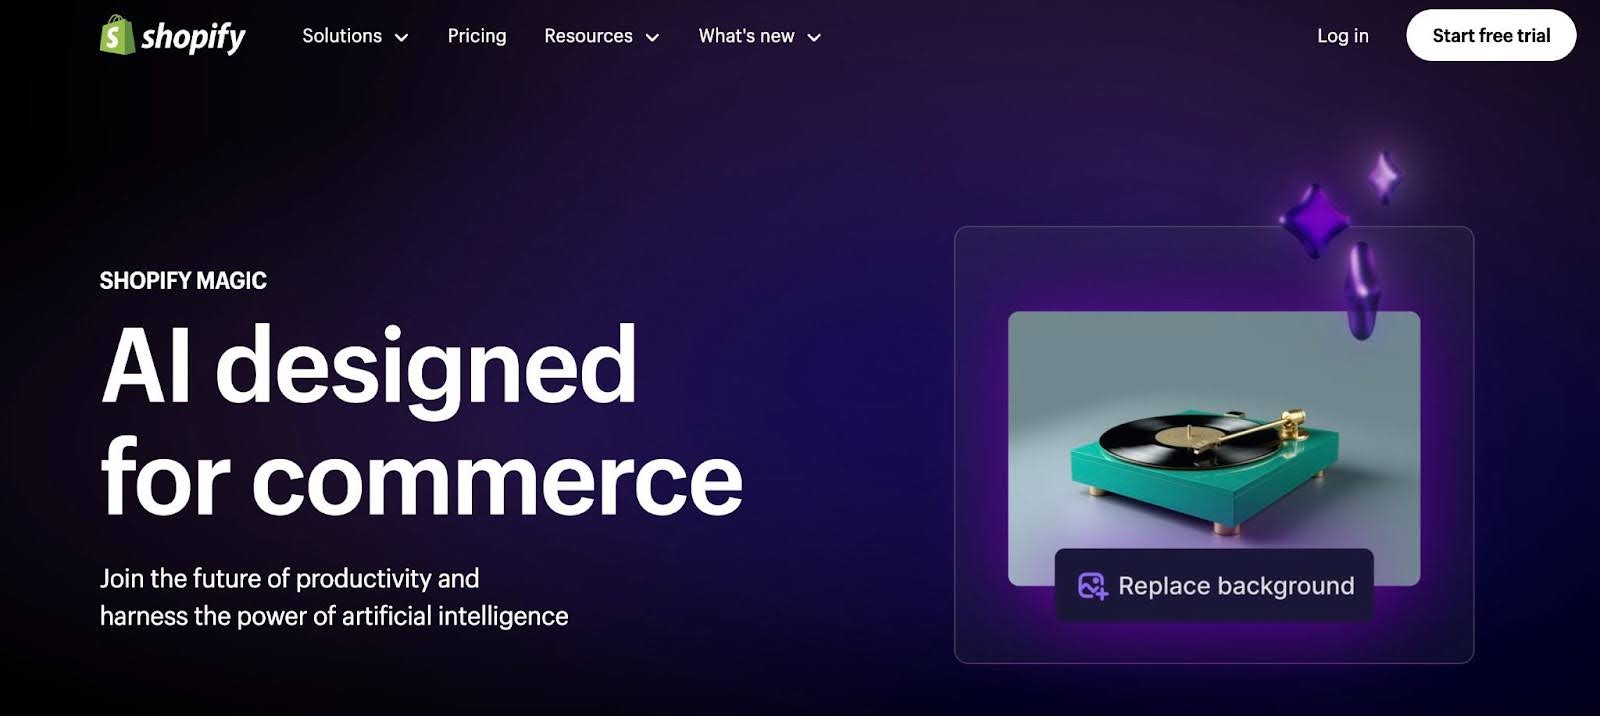 Shopify magic product page, with text “AI designed for commerce” on left and record player on right.